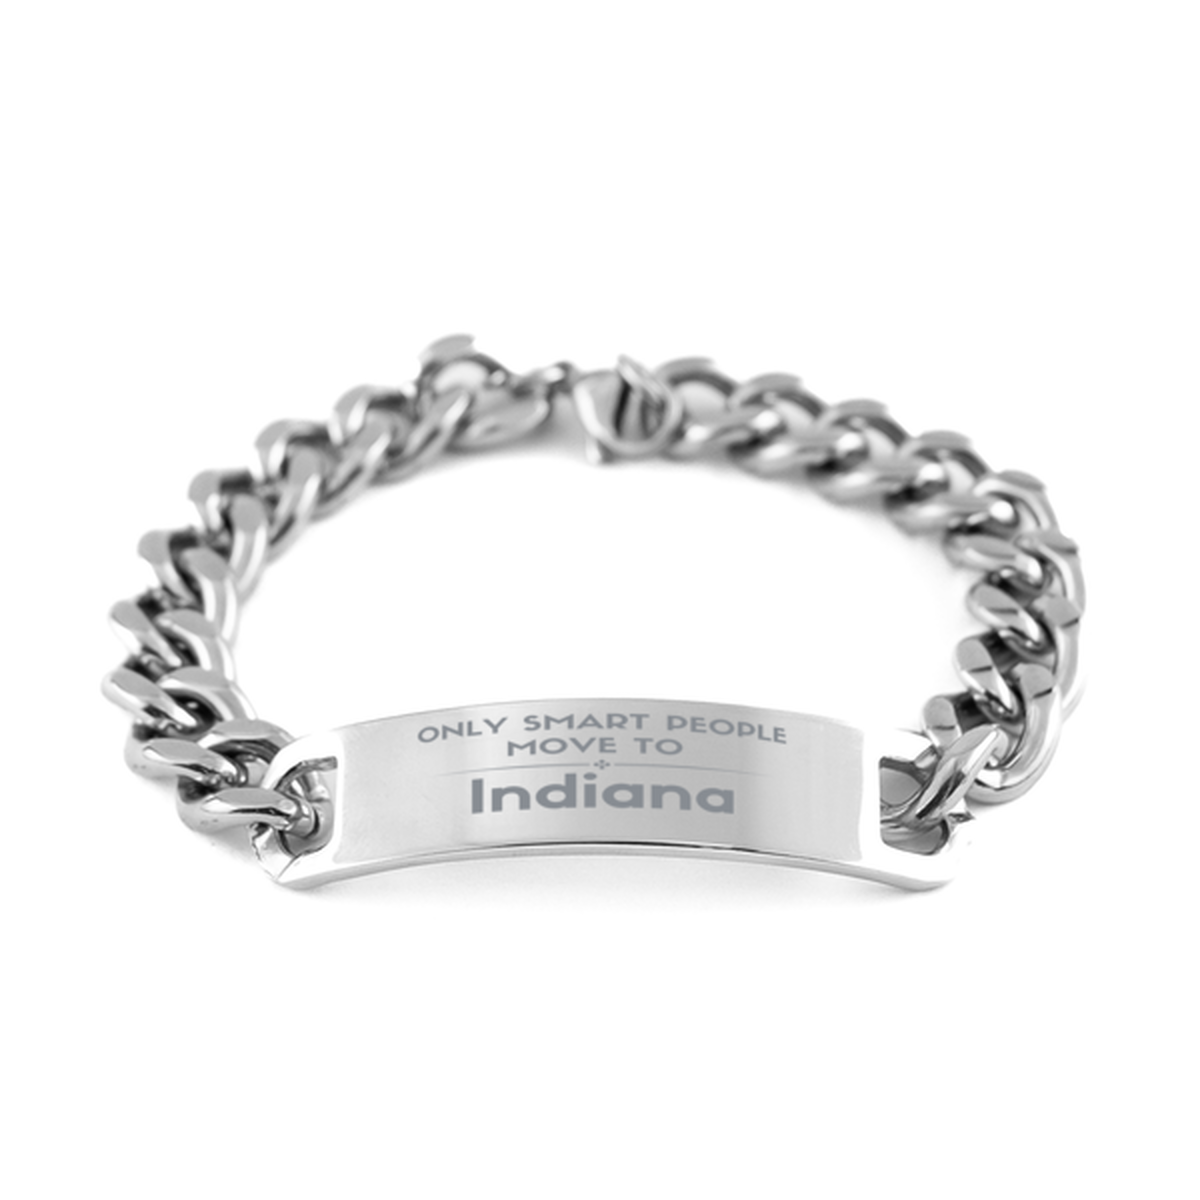 Only smart people move to Indiana Cuban Chain Stainless Steel Bracelet, Gag Gifts For Indiana, Move to Indiana Gifts for Friends Coworker Funny Saying Quote